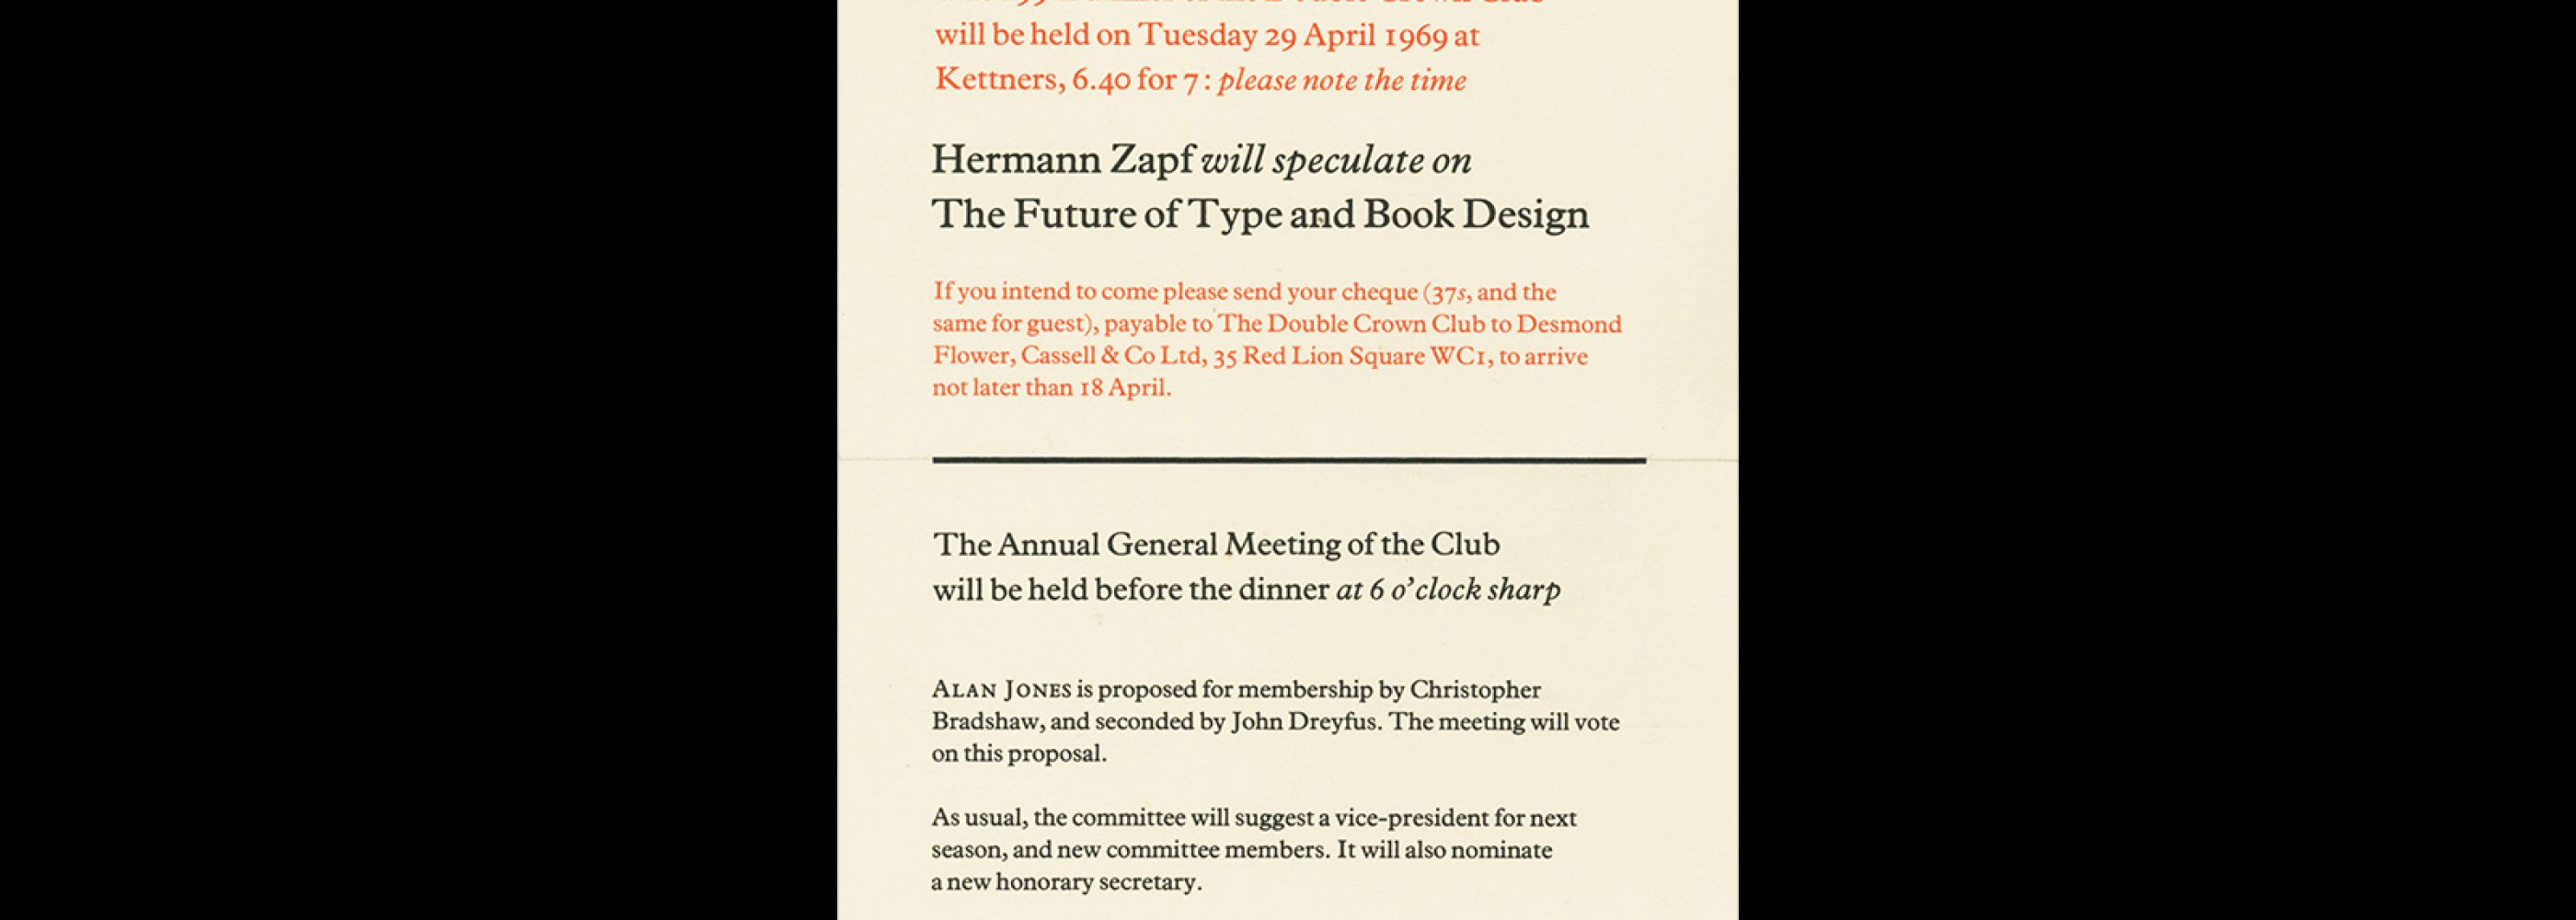 Double Crown Club Dinner Invitation Card, Hermann Zapf on the Future of Type And Book Design, 1969